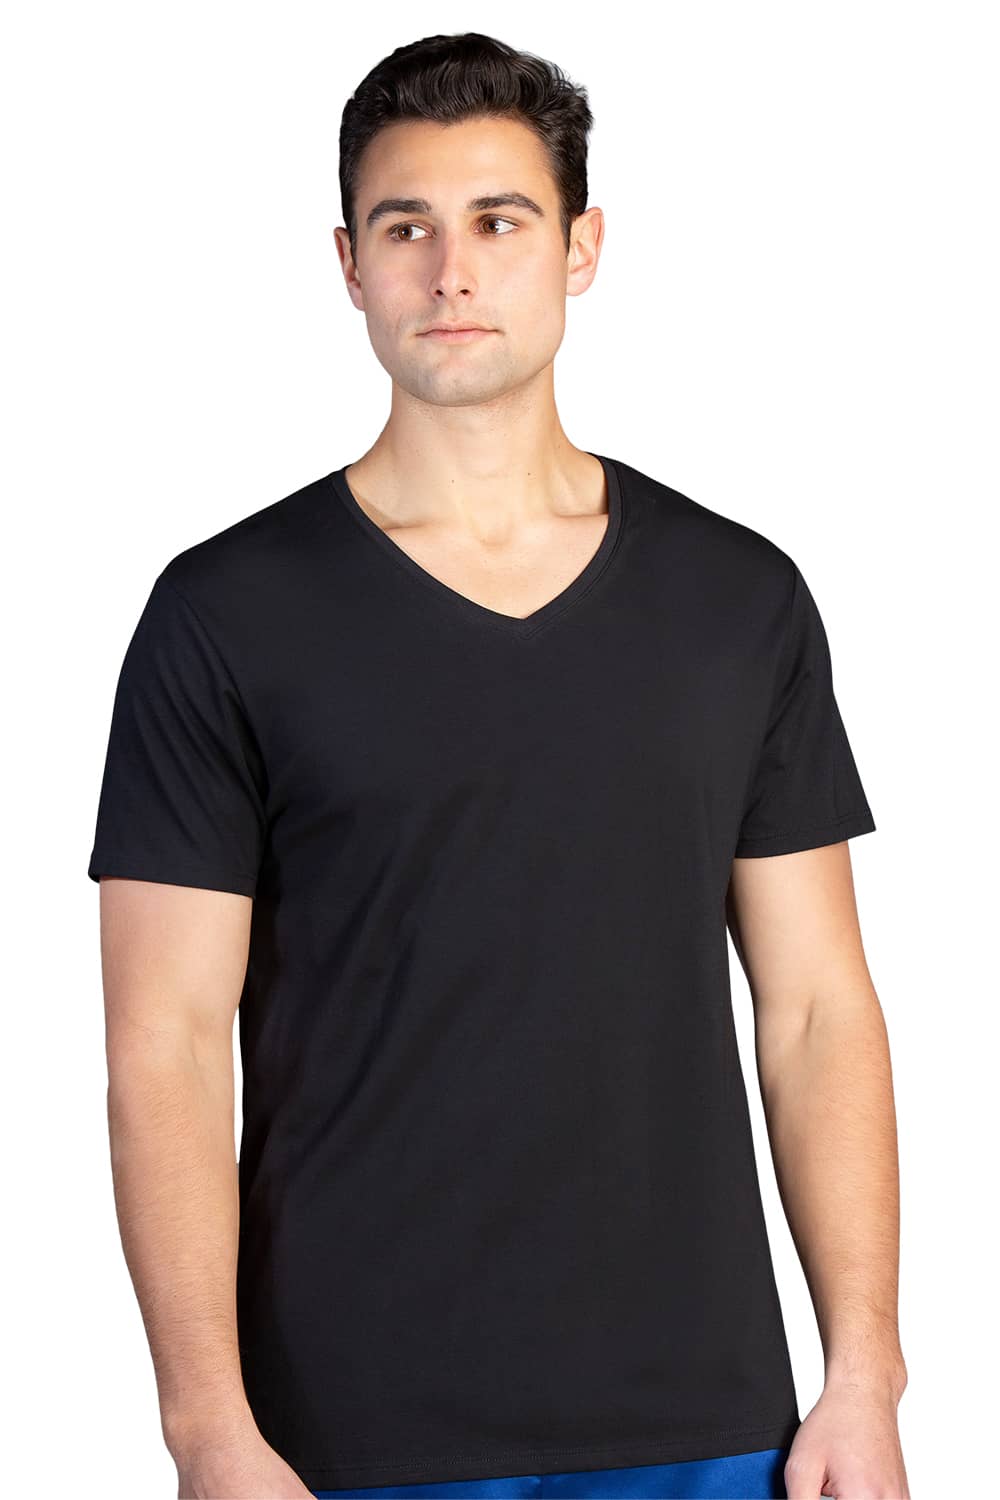 Men's Classic Fit Soft Stretch V-Neck Undershirt Mens>Casual>Tops Fishers Finery Black Small Single Pack